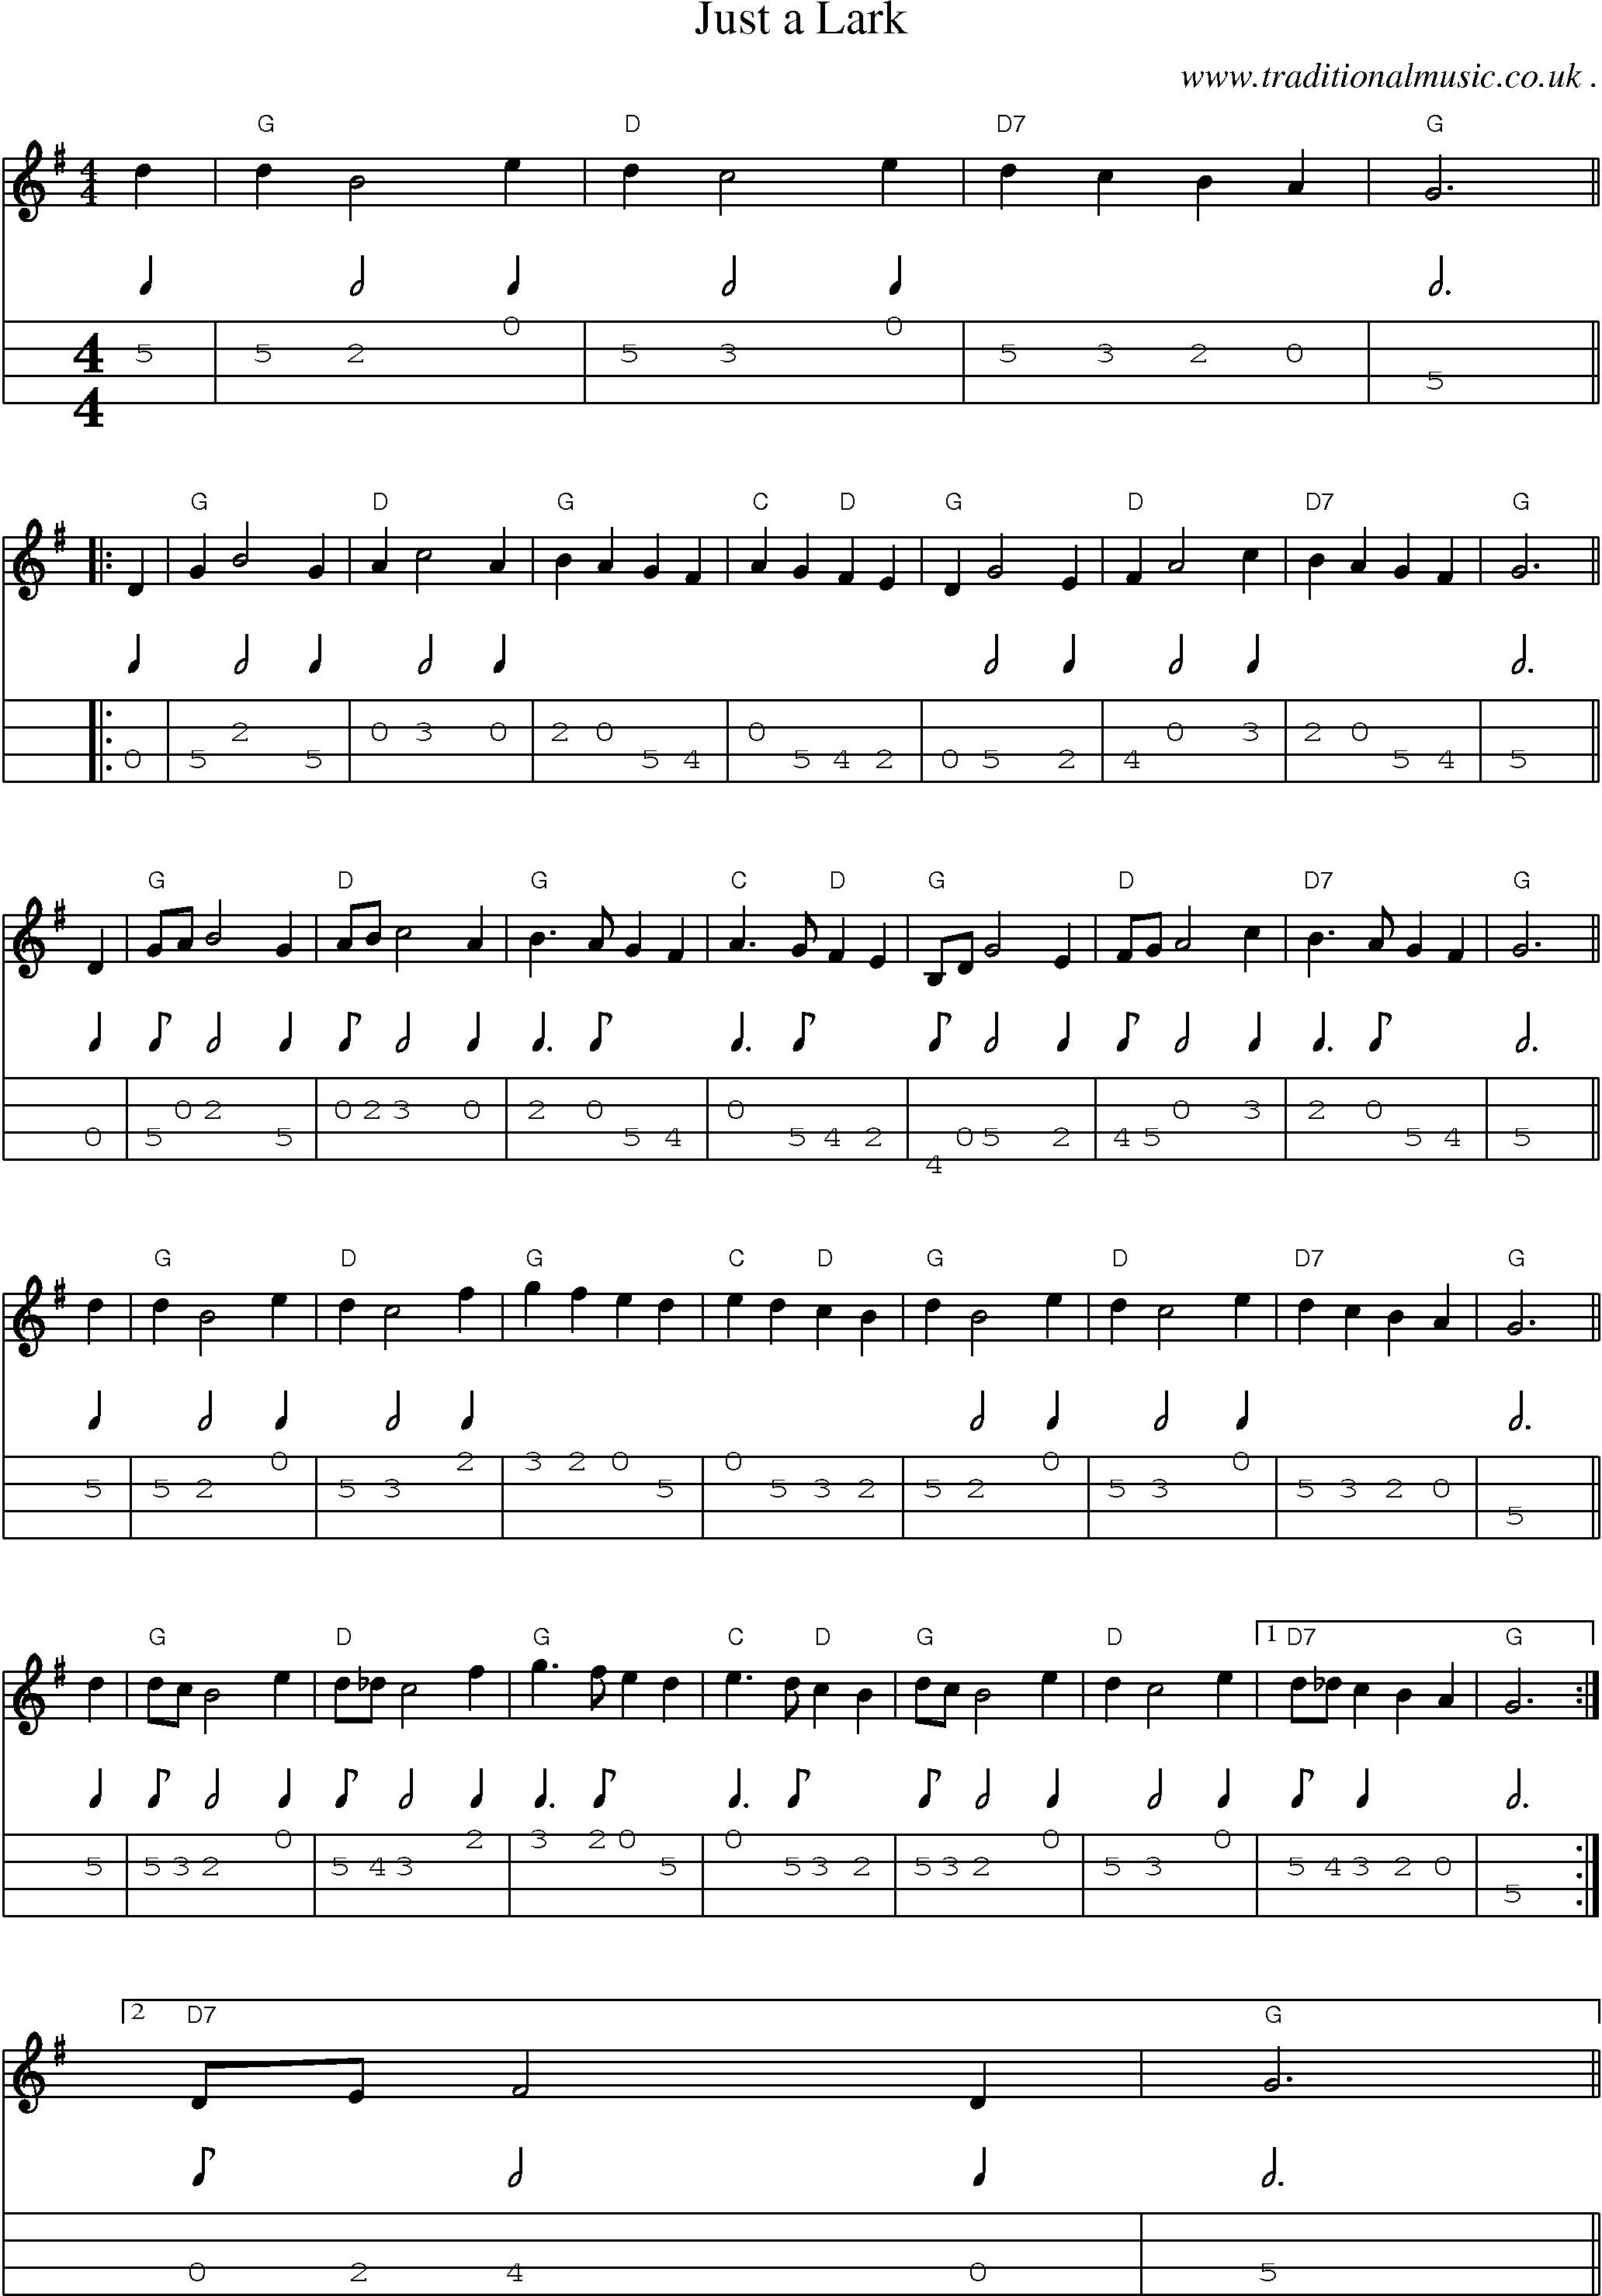 Sheet-music  score, Chords and Mandolin Tabs for Just A Lark